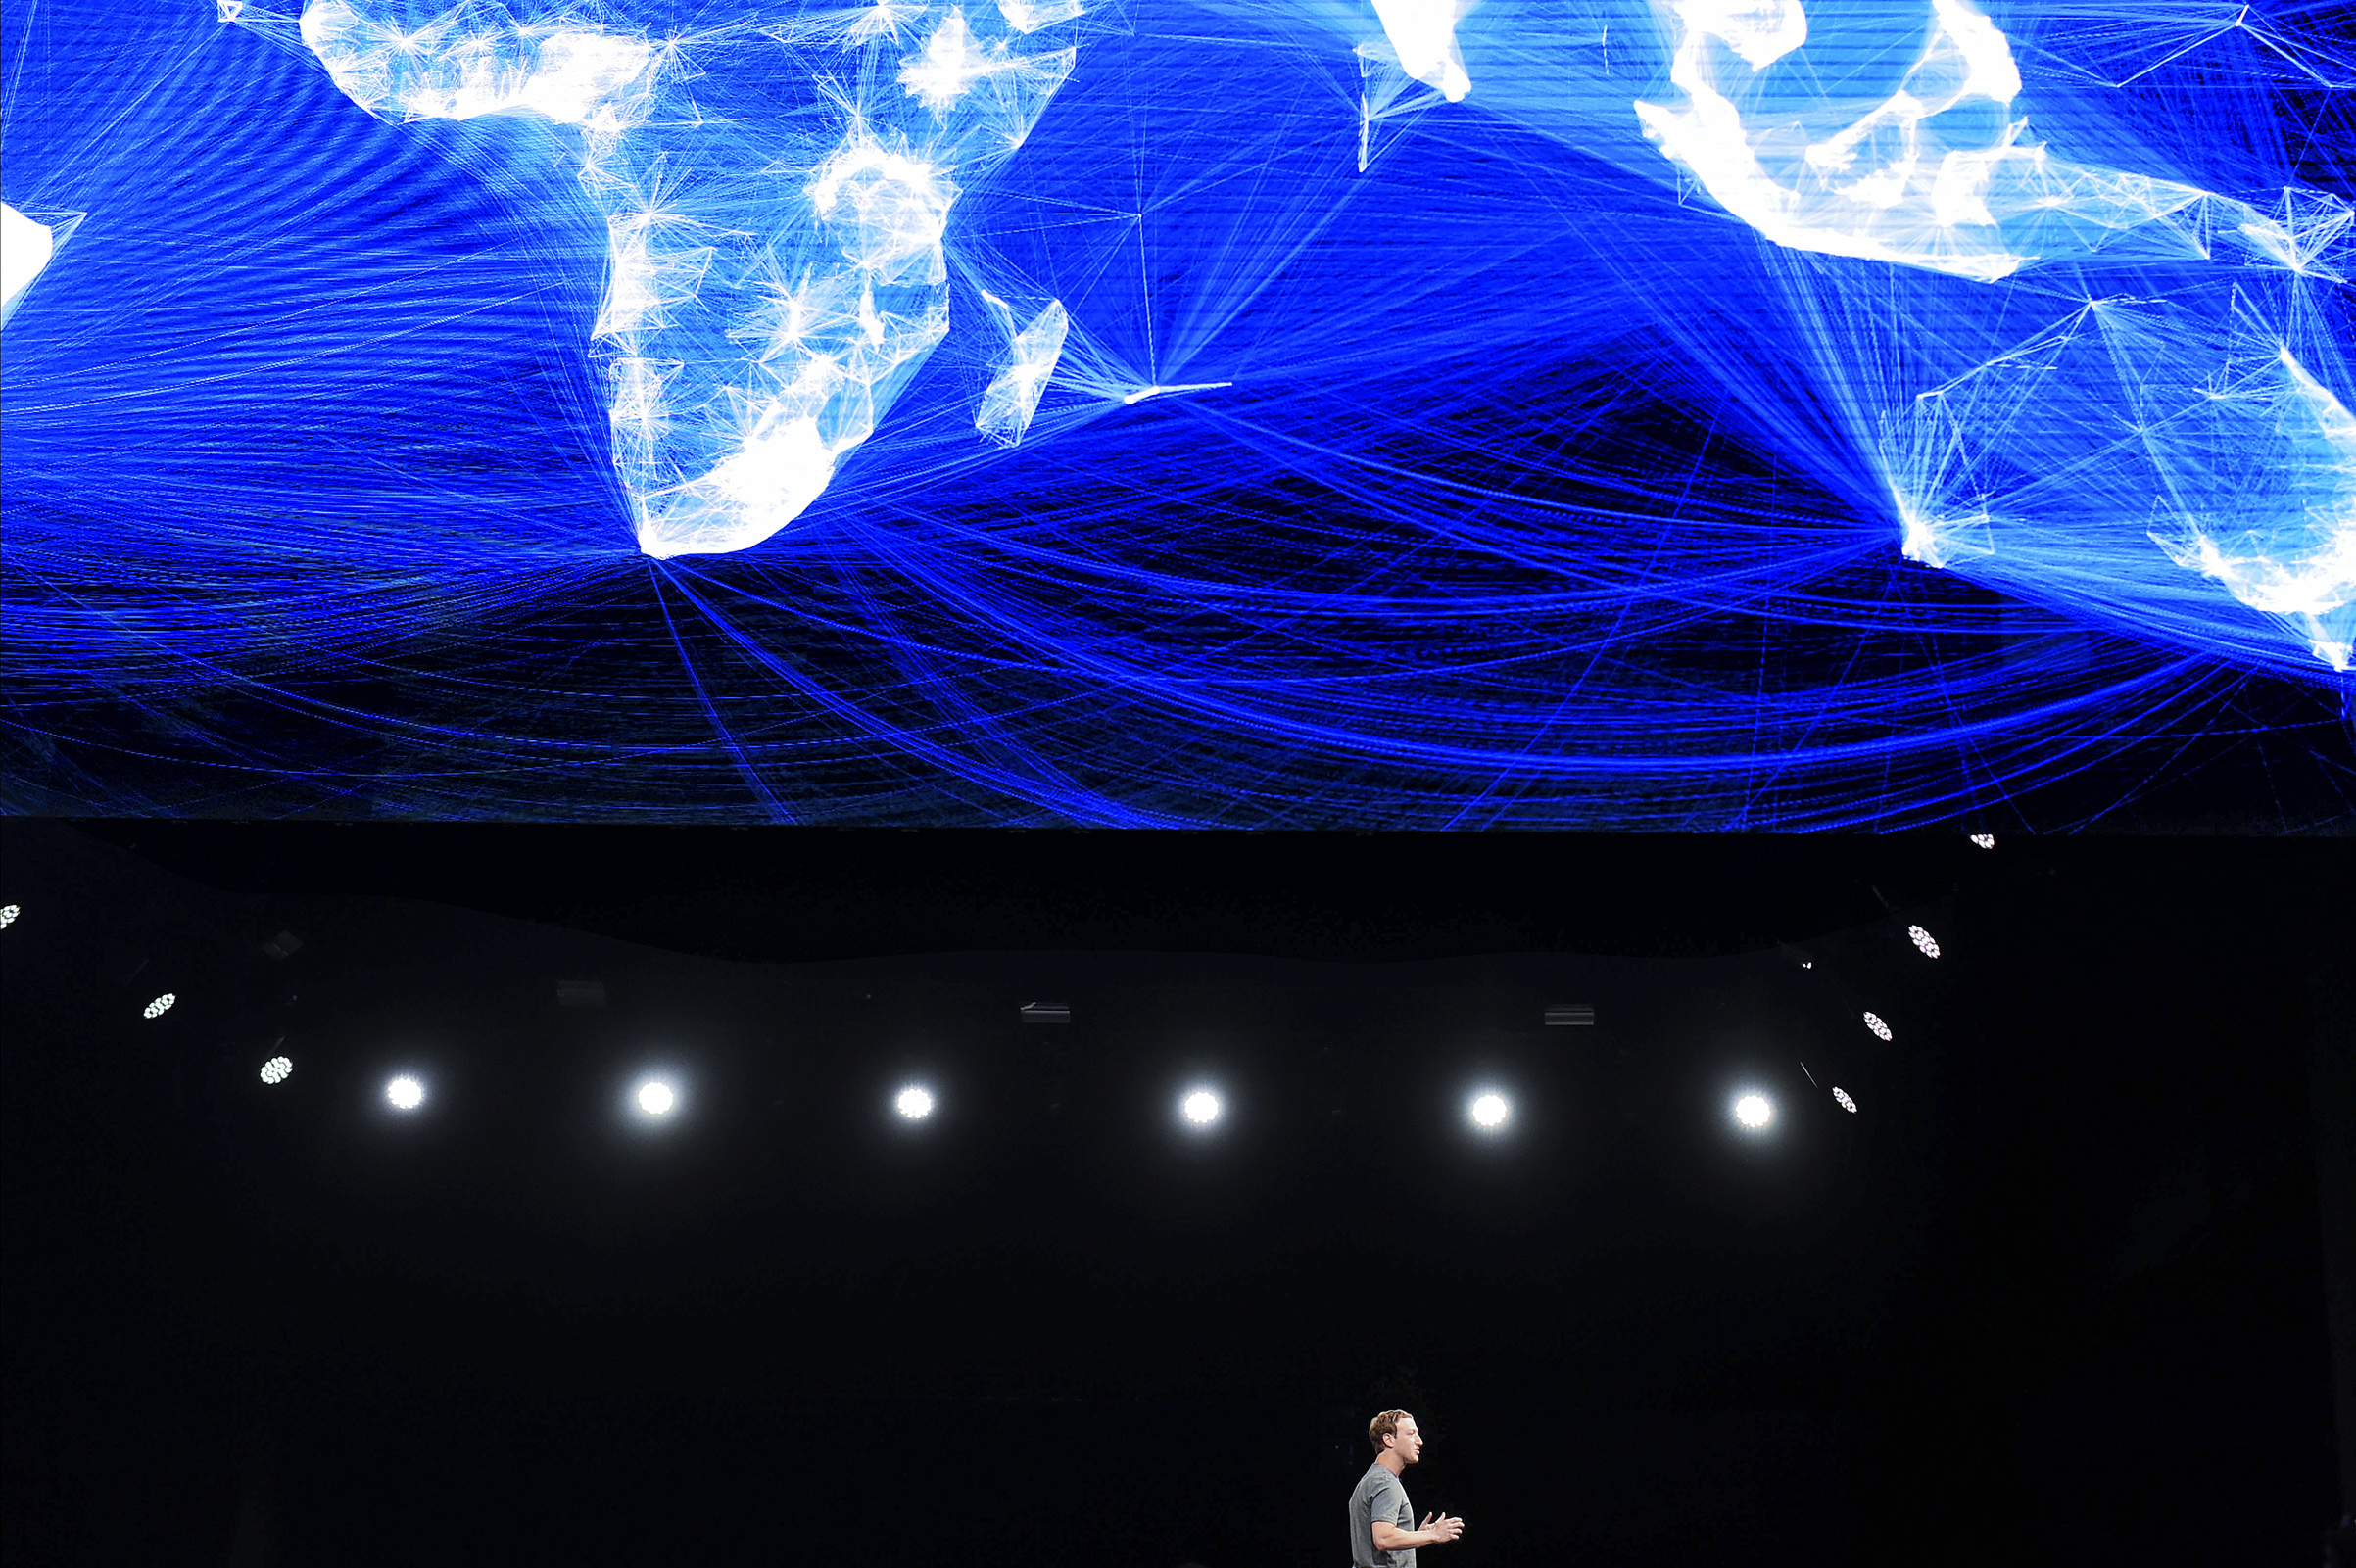 Facebook founder and CEO Mark Zuckerberg speaks during a presentation on Feb. 21, 2016, in Barcelona (David Ramos—Getty Images)